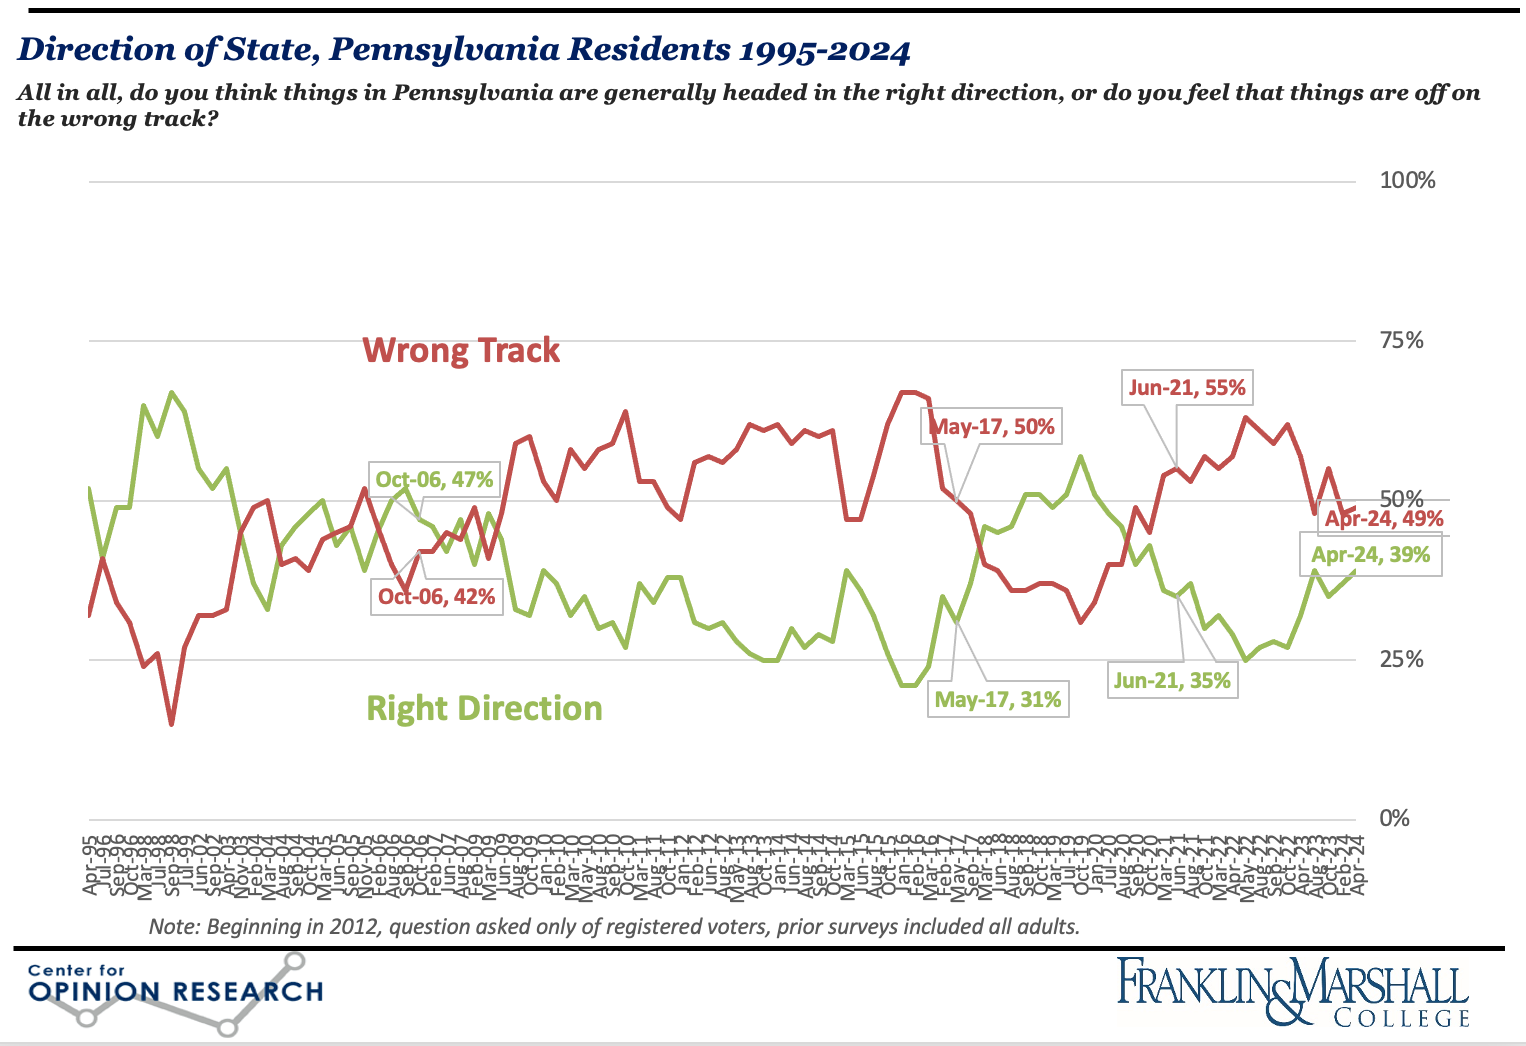 Figure 1. LIne graph showing F&M Poll data on Pennsylvania voters' feelings about the direction of the state, April 1995 through April 2024. Voters have not expressed net positive feelings about the direction of the state since August 2020.